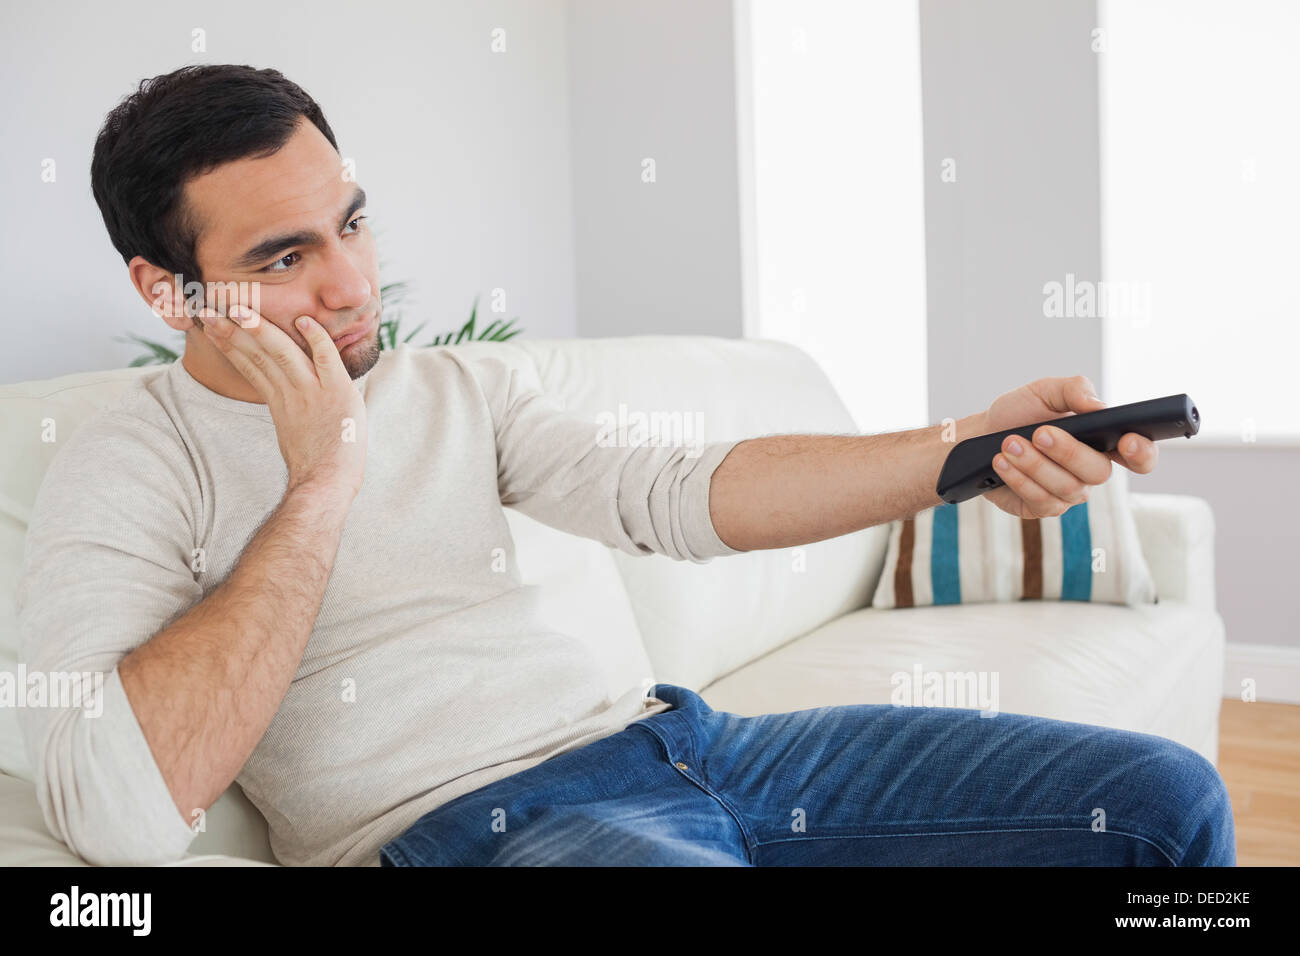 Handsome man getting bored of tv programs Stock Photo